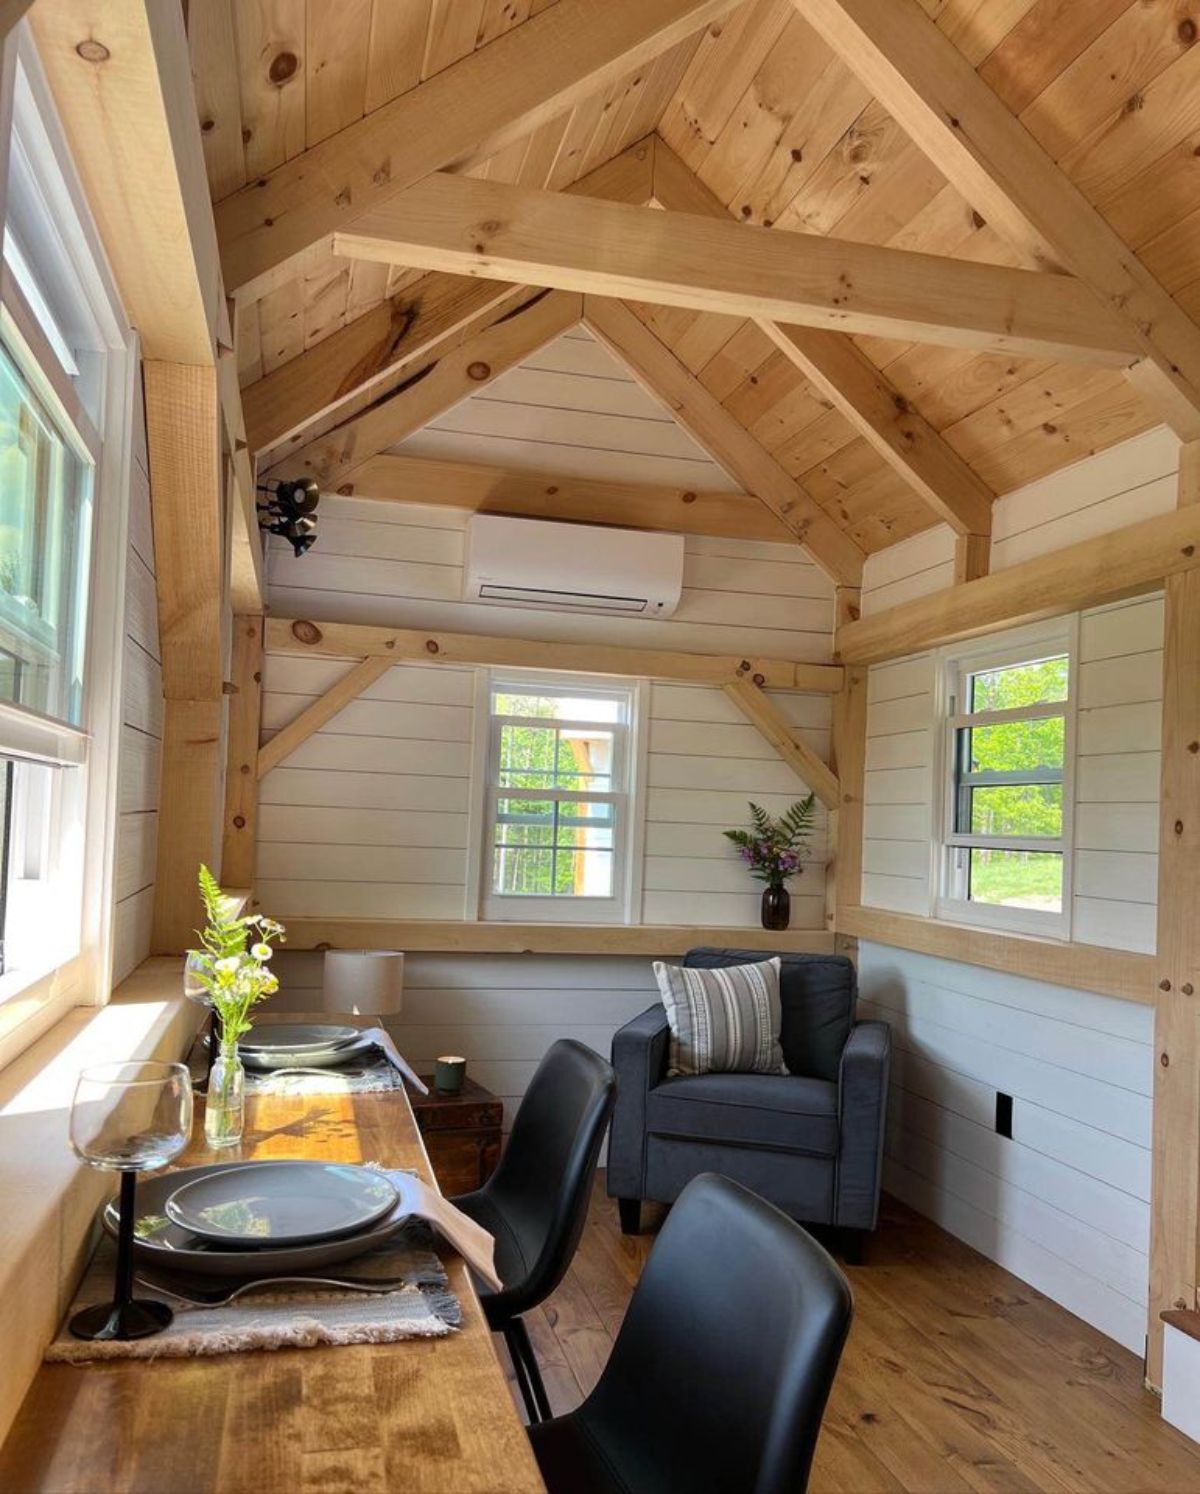 This 26’ Timber Framed Tiny House comes with many appliances including split air condition unit